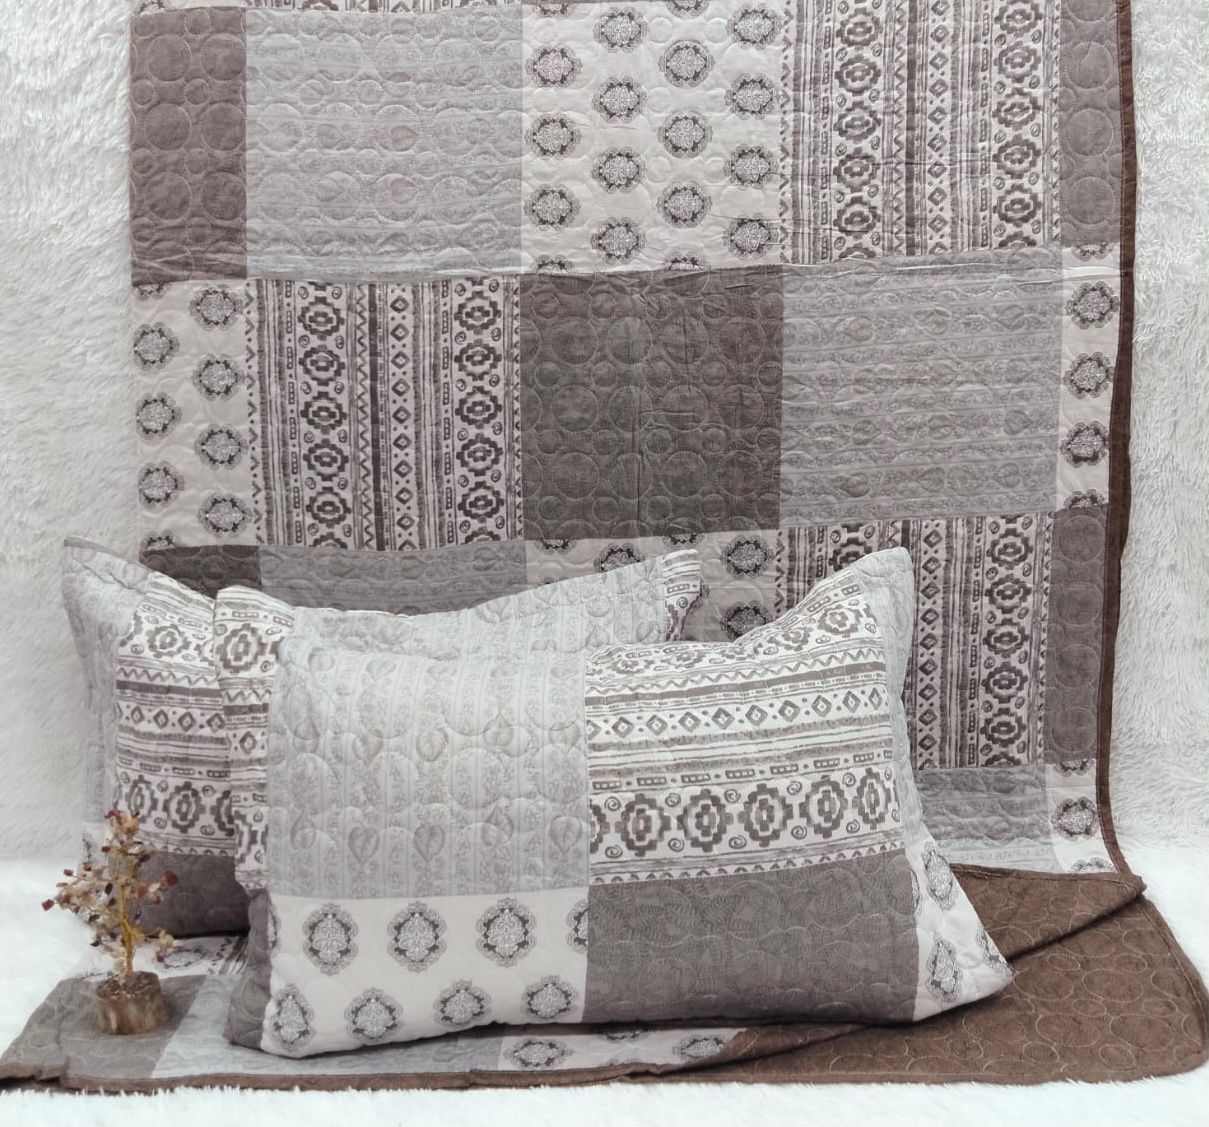 Ethnic Quilted Bedcovers